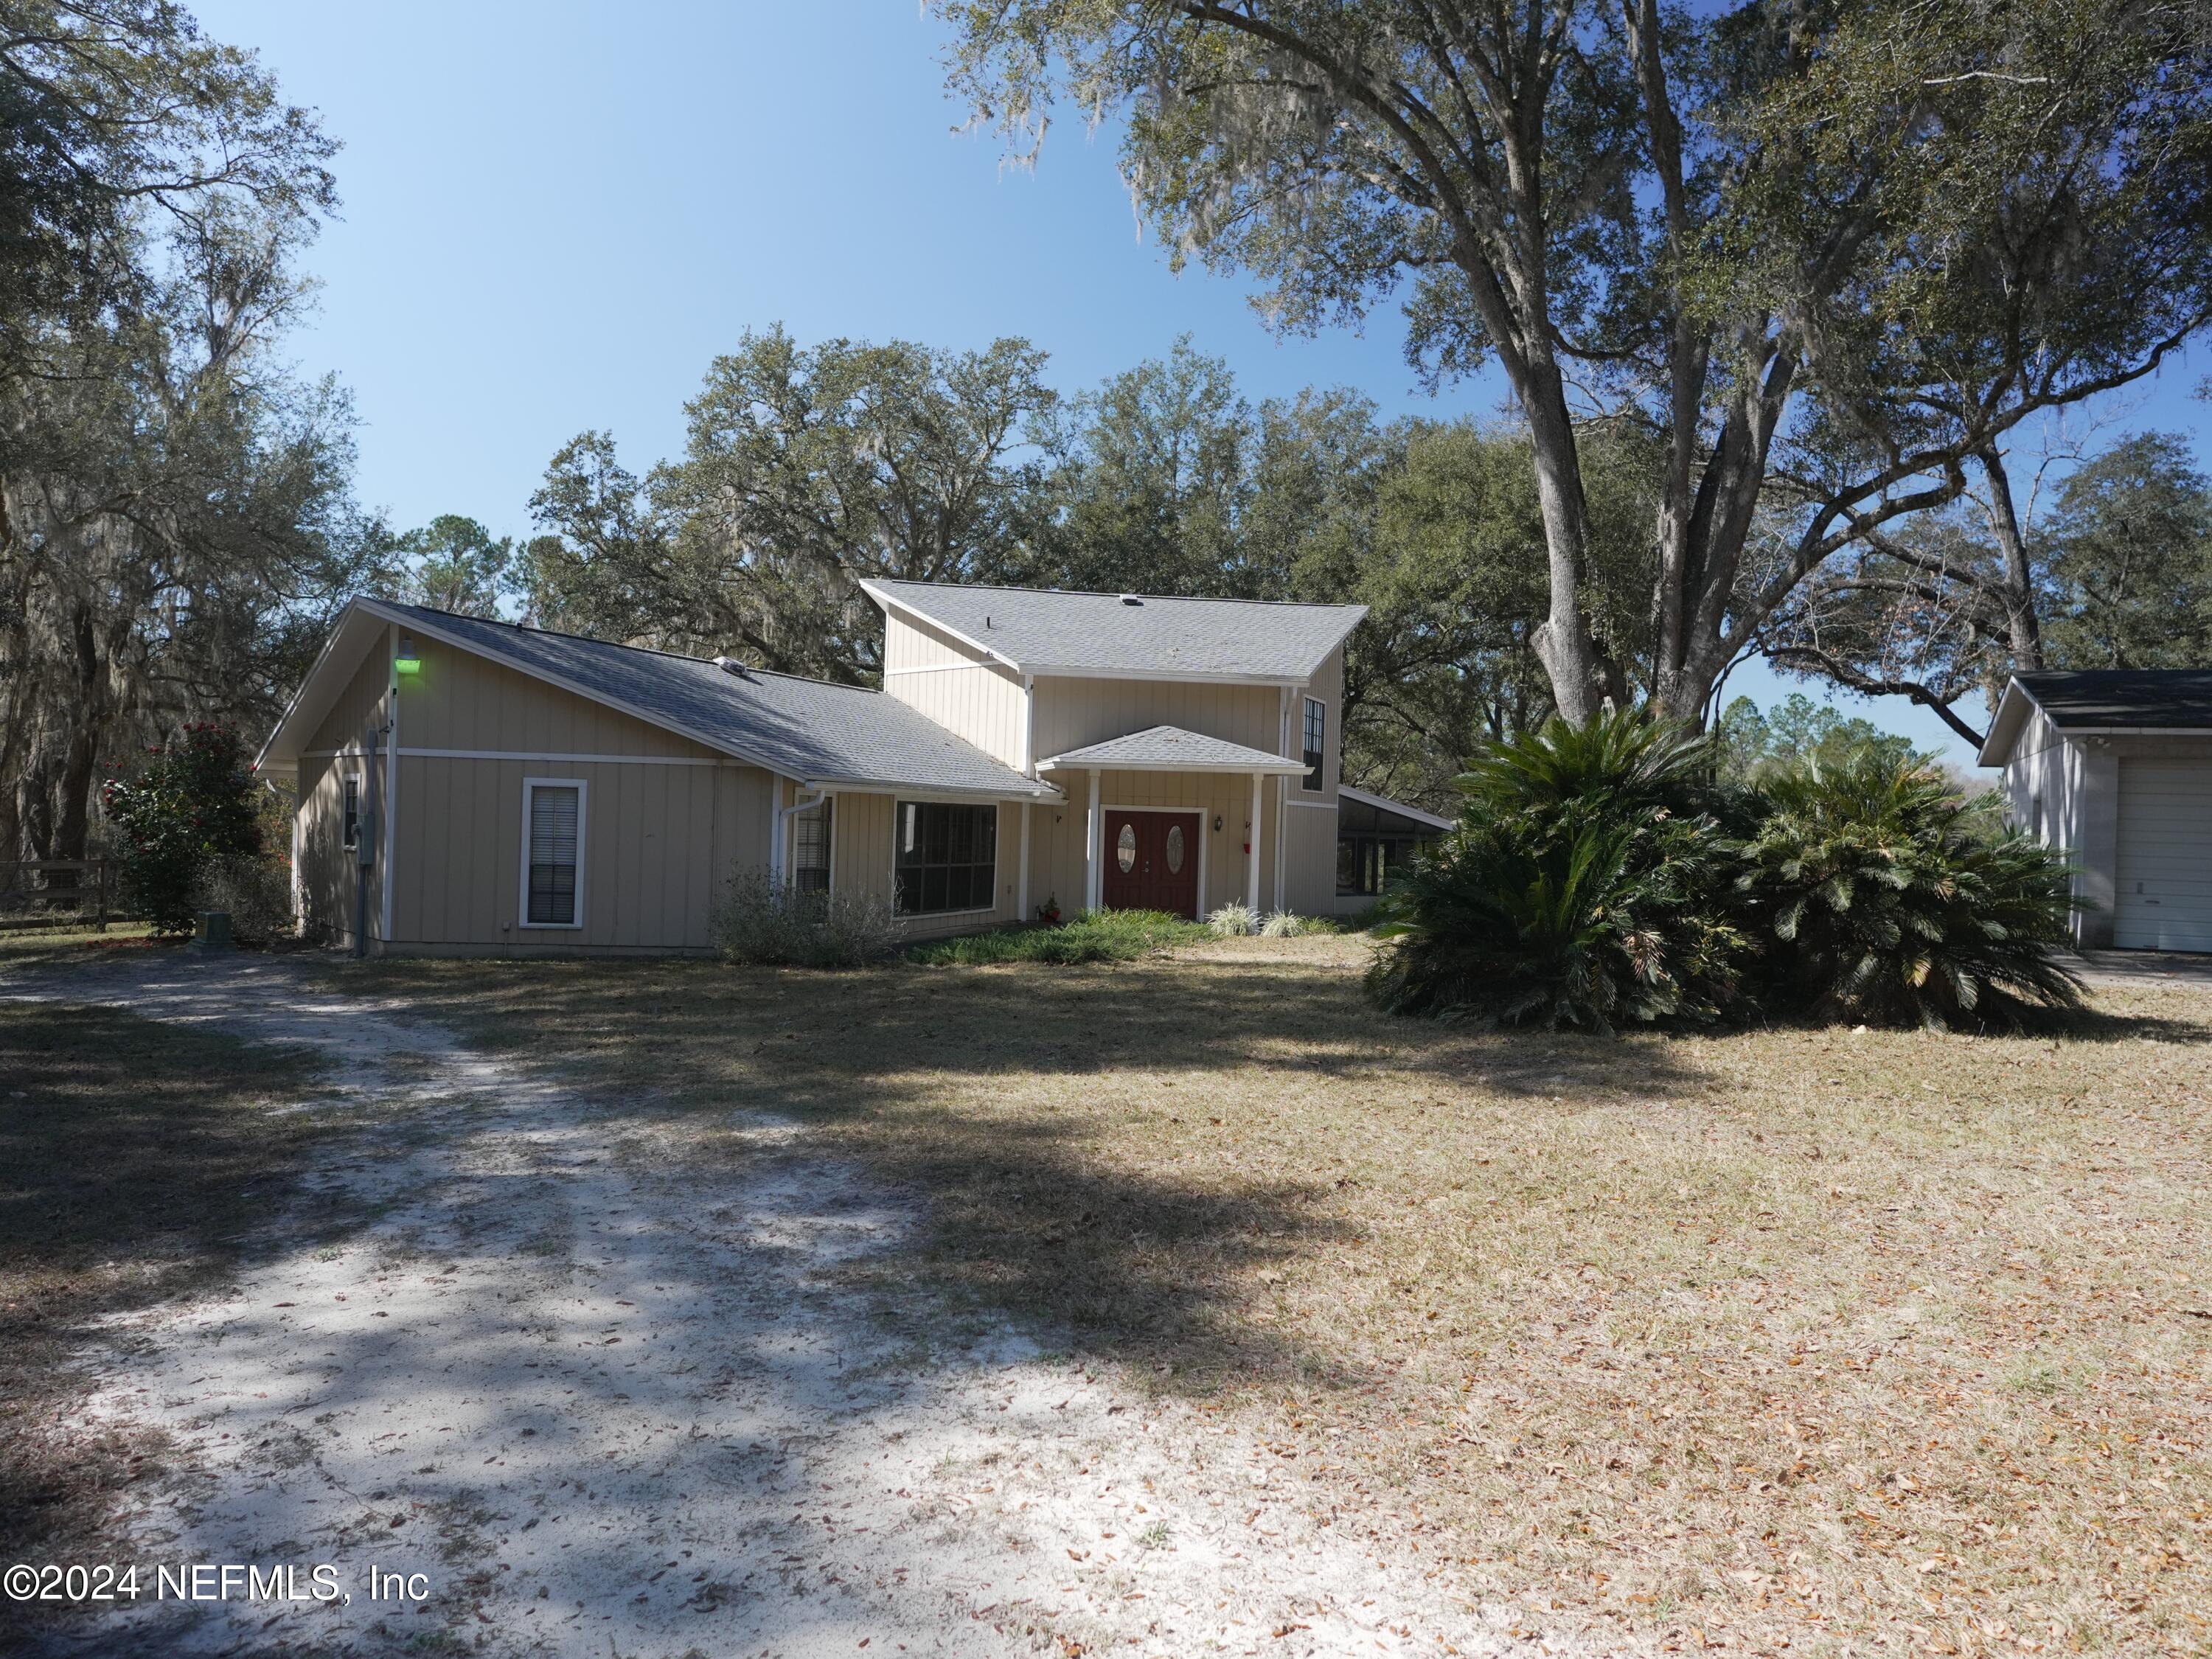 Bryceville, FL home for sale located at 977 WINDSOCK Lane, Bryceville, FL 32009